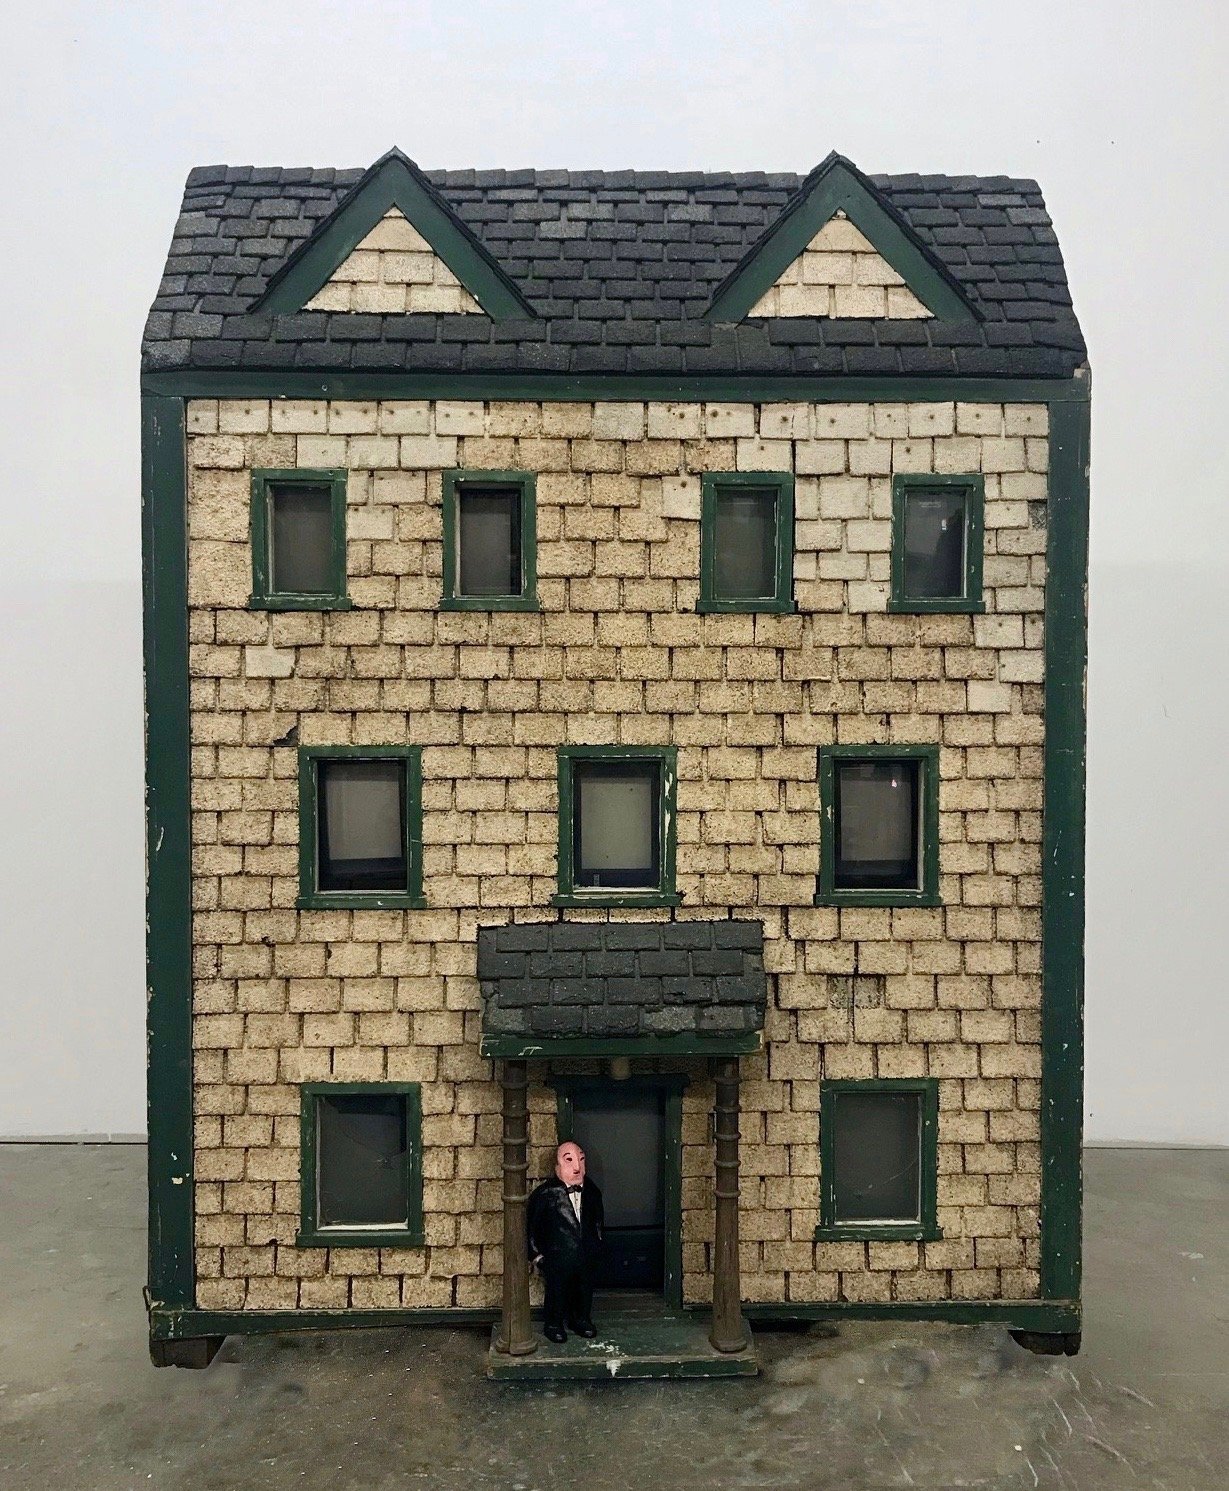  Nam June Paik,  Hitchcock Dollhouse , 1995. Readymade antique dollhouse, nine various sized video monitors, three-channel video and plaster Hitchcock figure. 58 ½ x 41 ½ x 20 inches.  